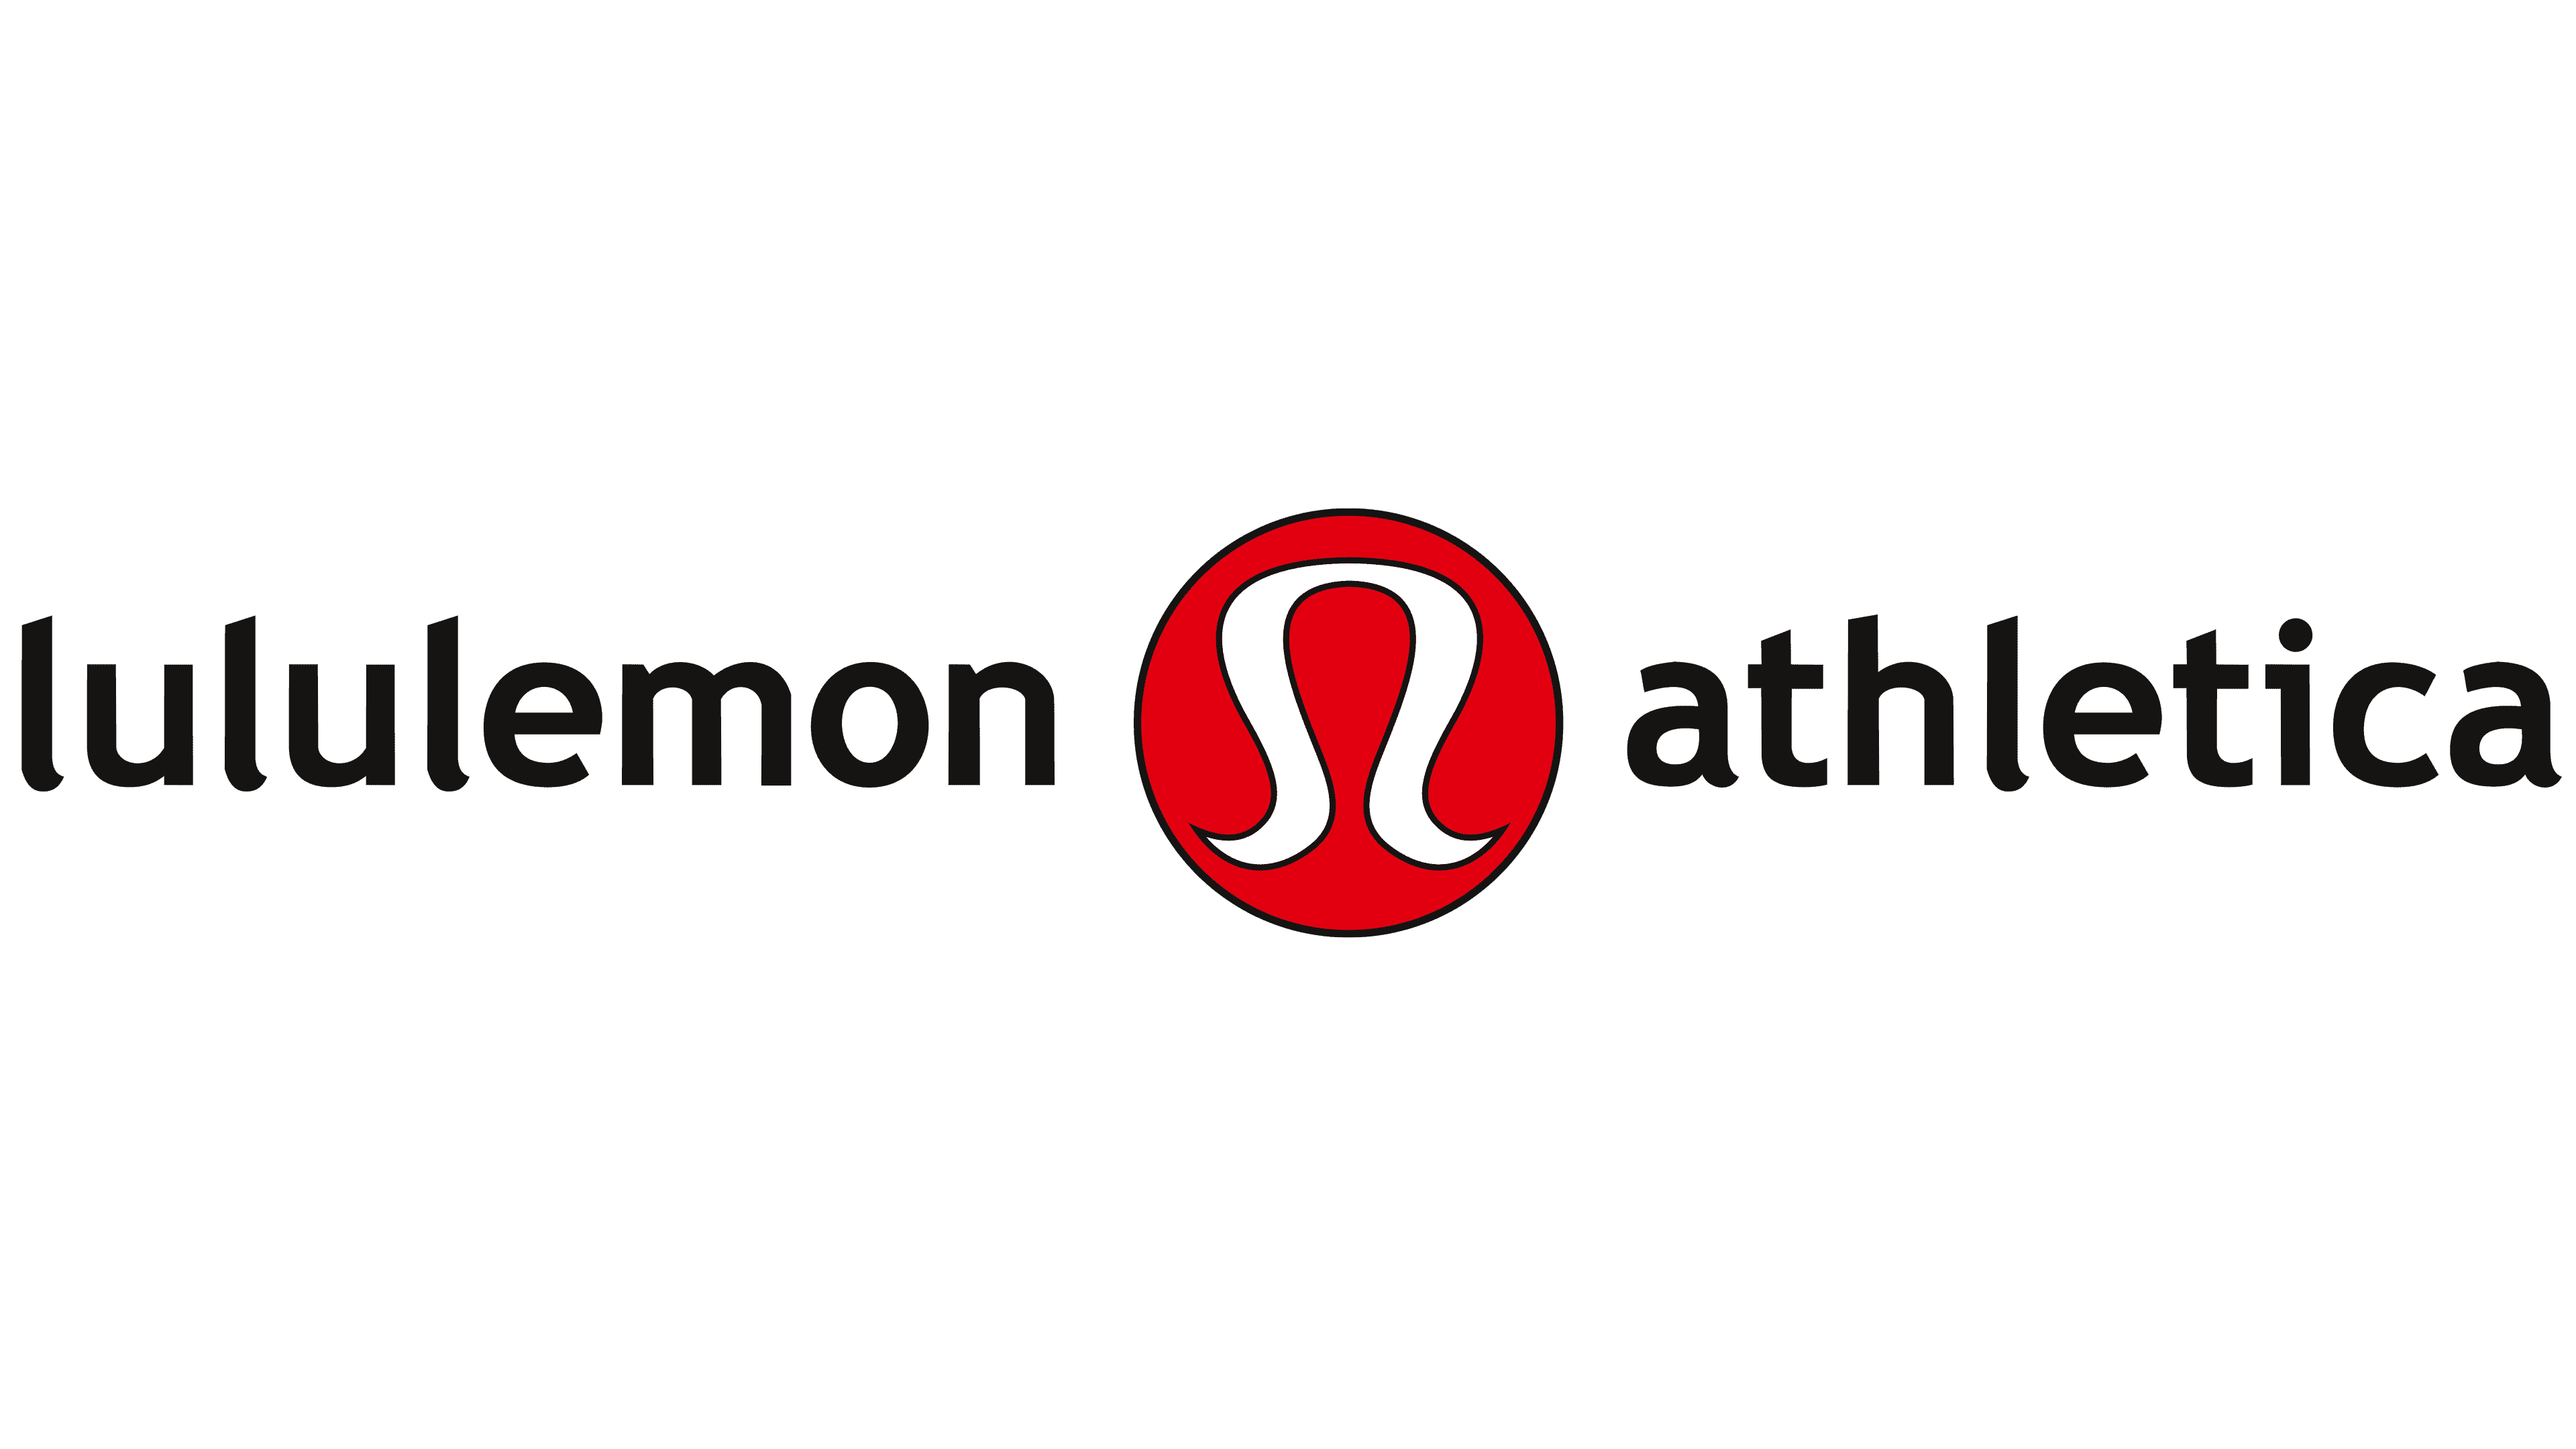 What Is The Lululemon Logo Supposed To Be Capitalized